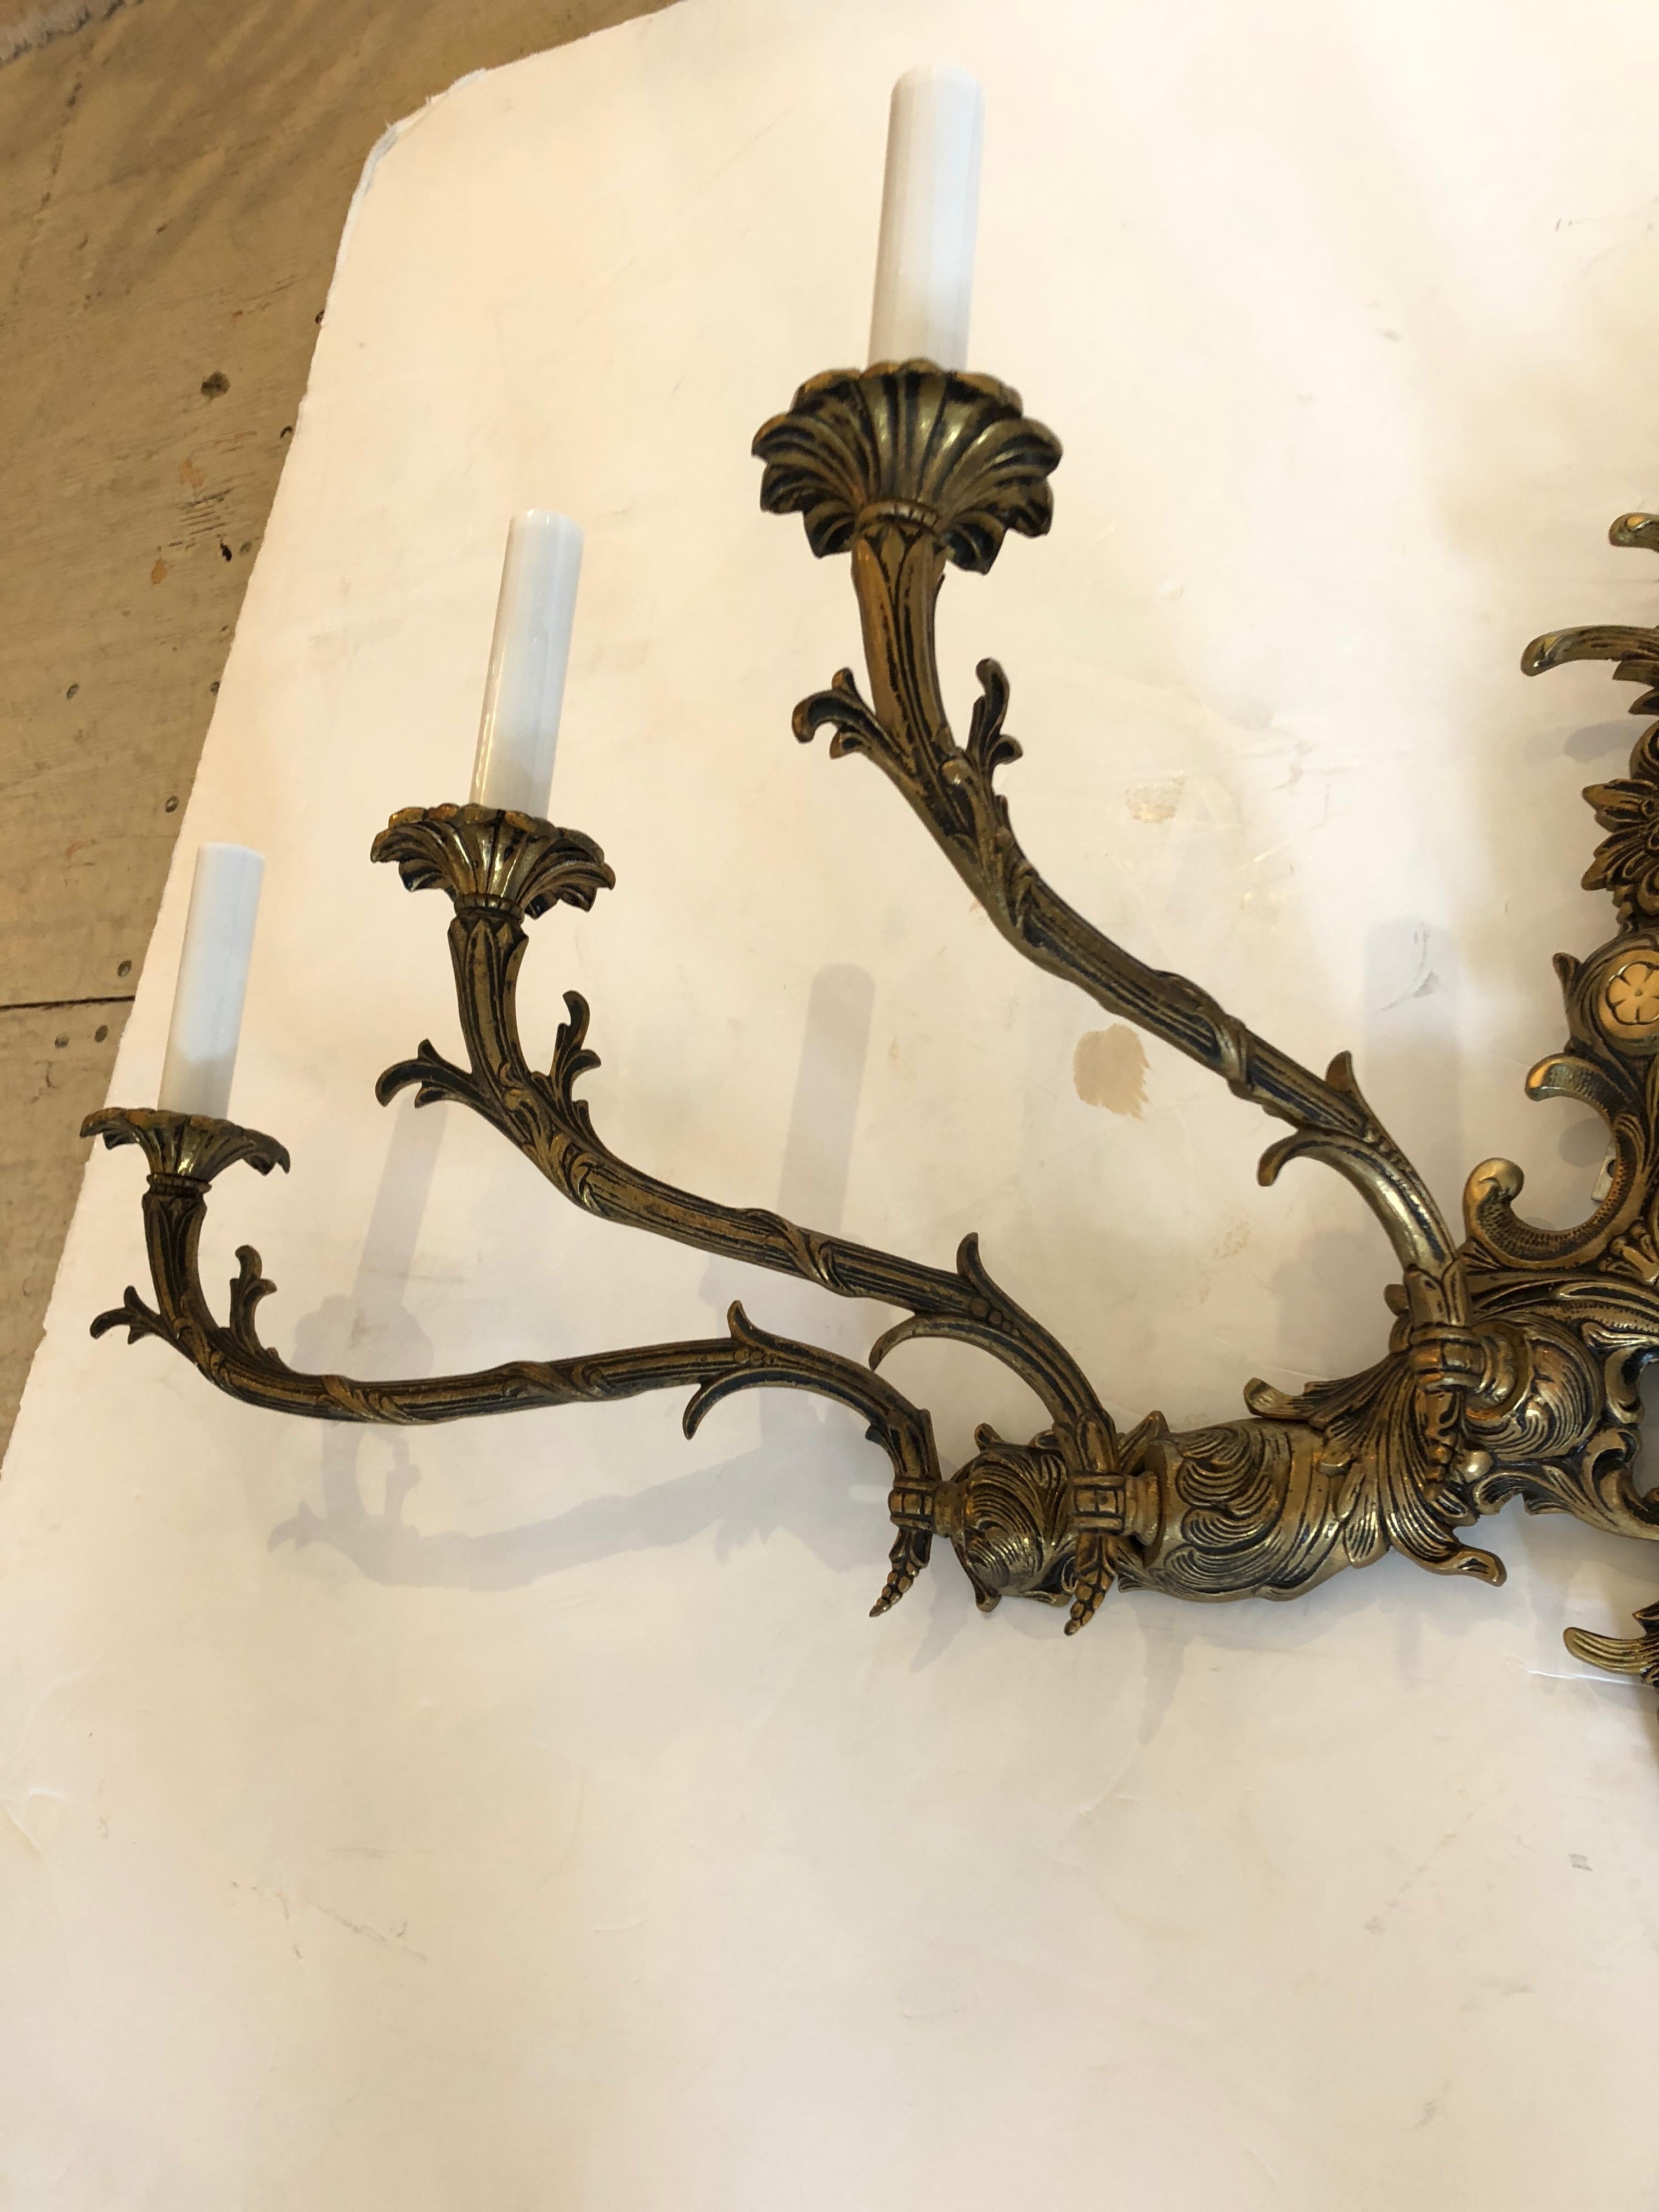 Rococo Glamorous Vintage Spanish Brass Seven Arm Wall Sconce